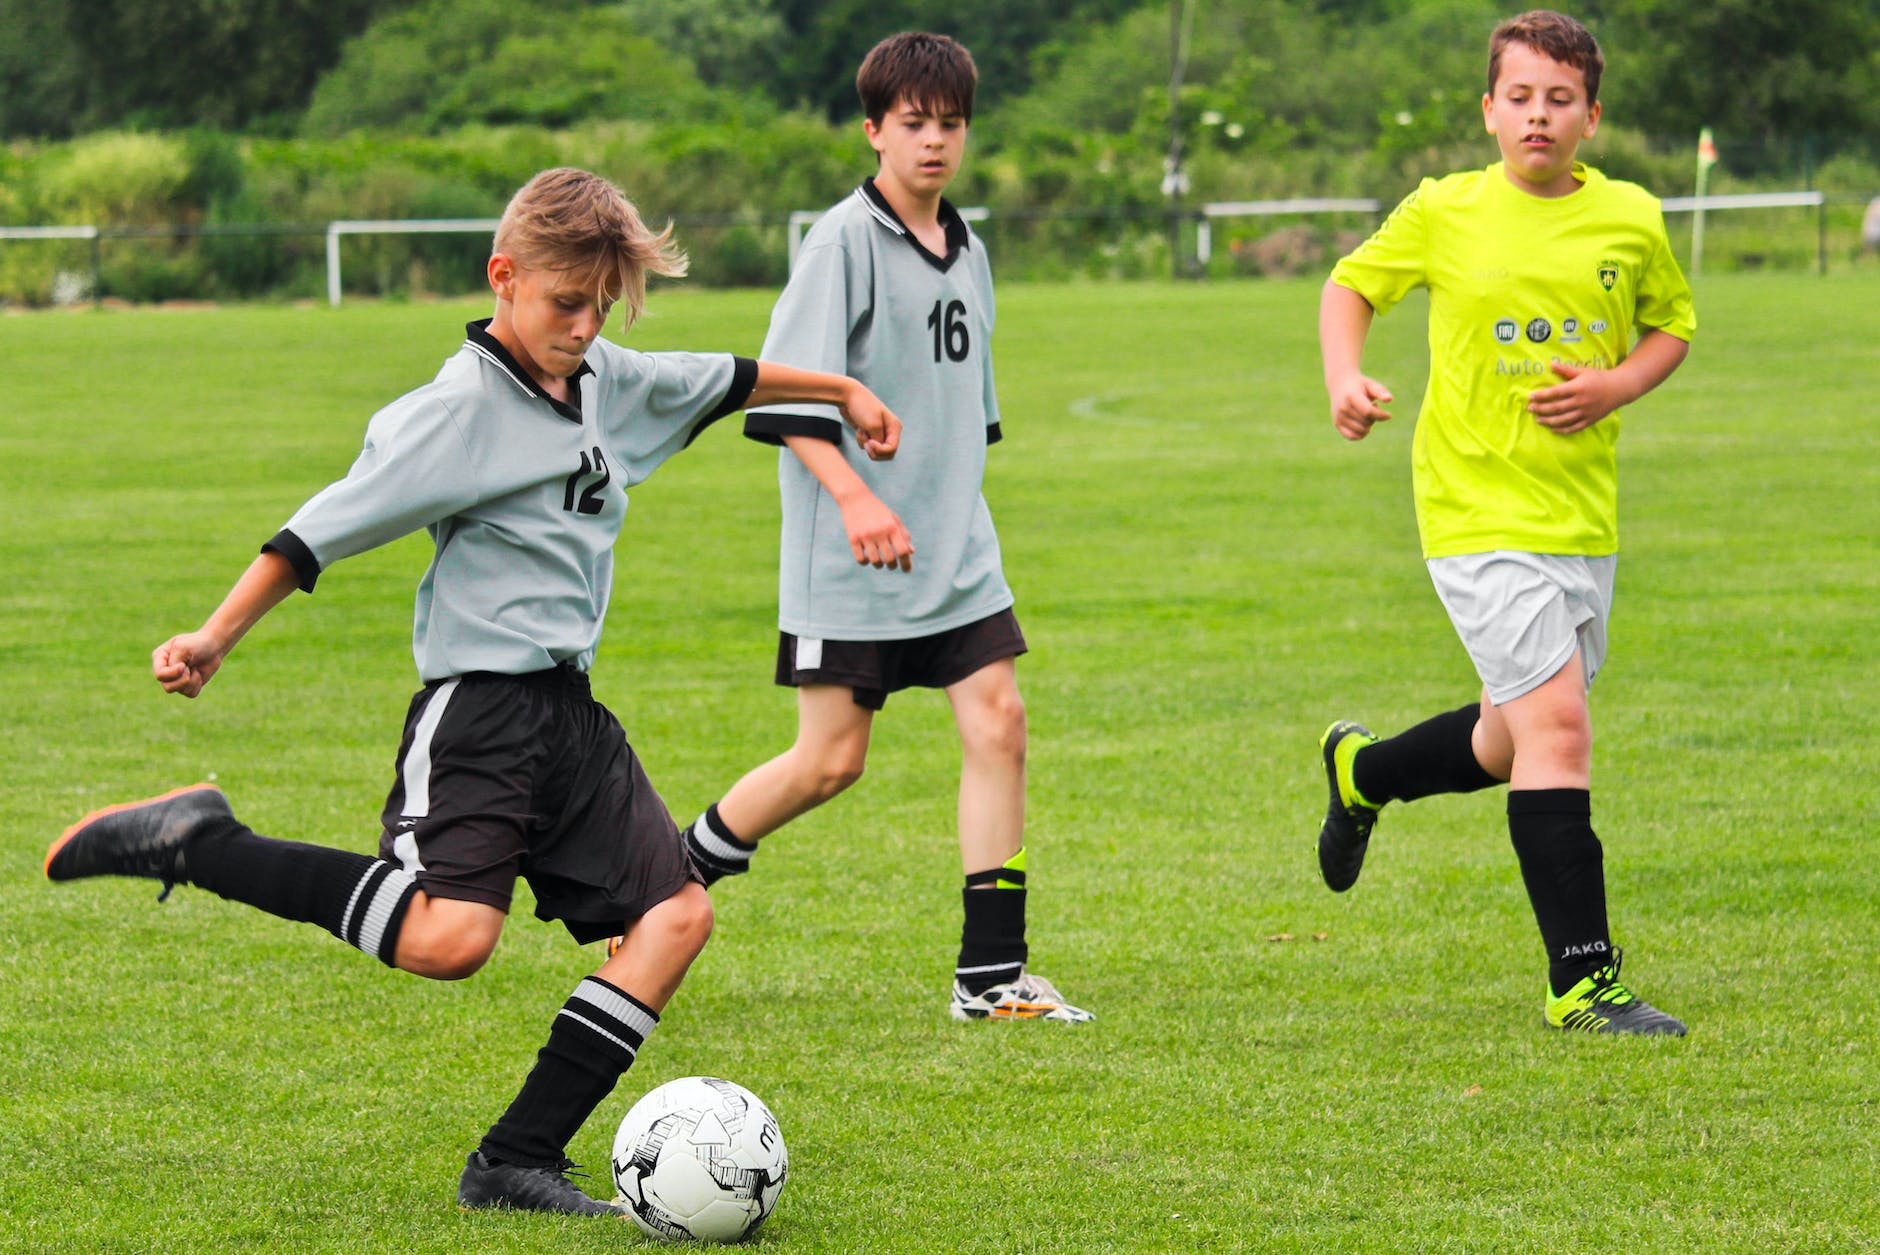 youth players must learn playing multiple positions